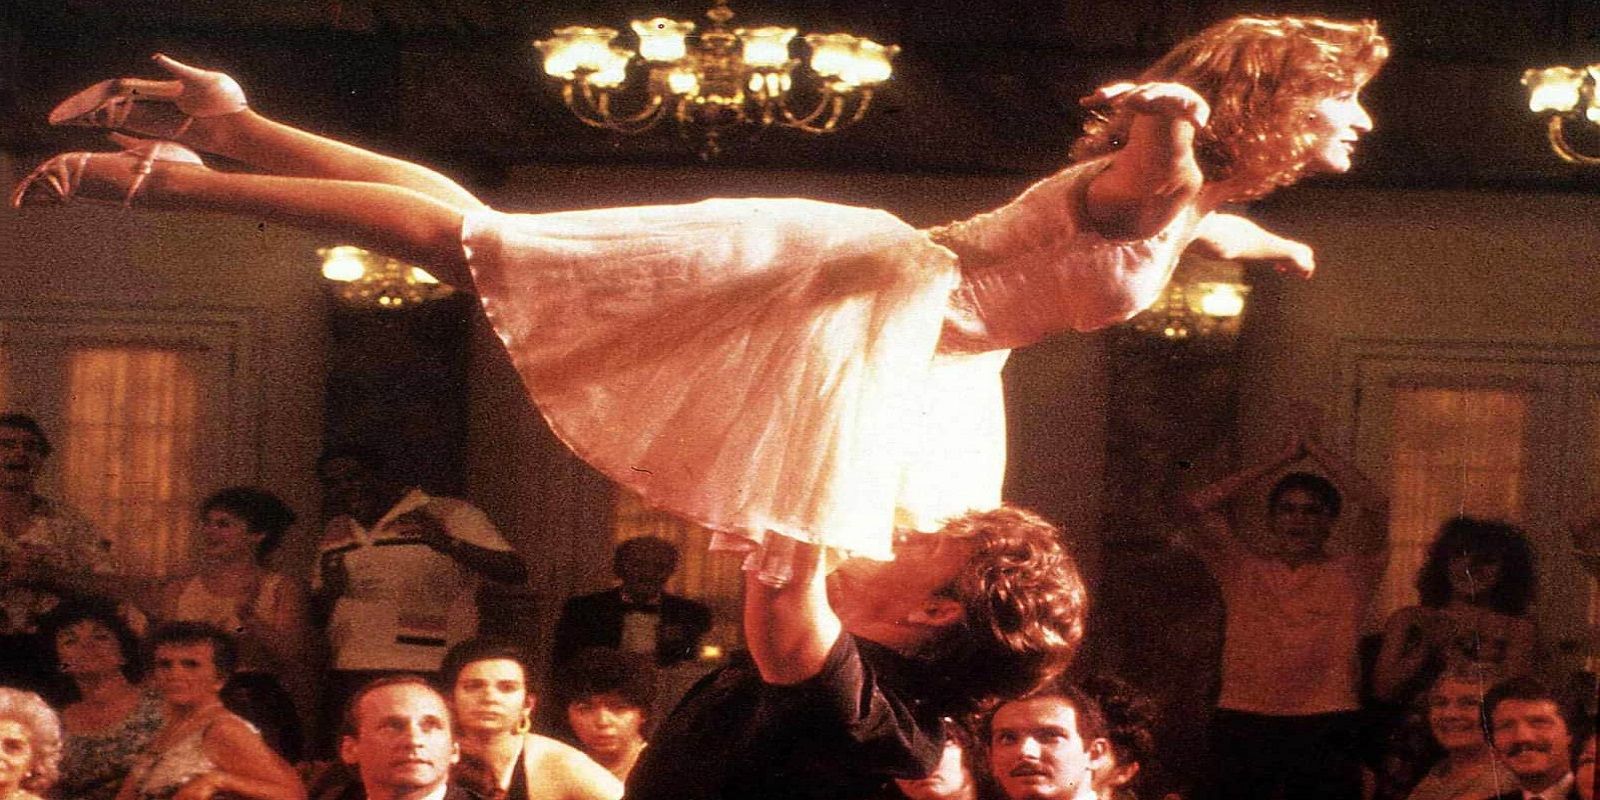 Dirty Dancing's Final Dance Scene Set to The Muppet Show Theme Is Oddly Perfect